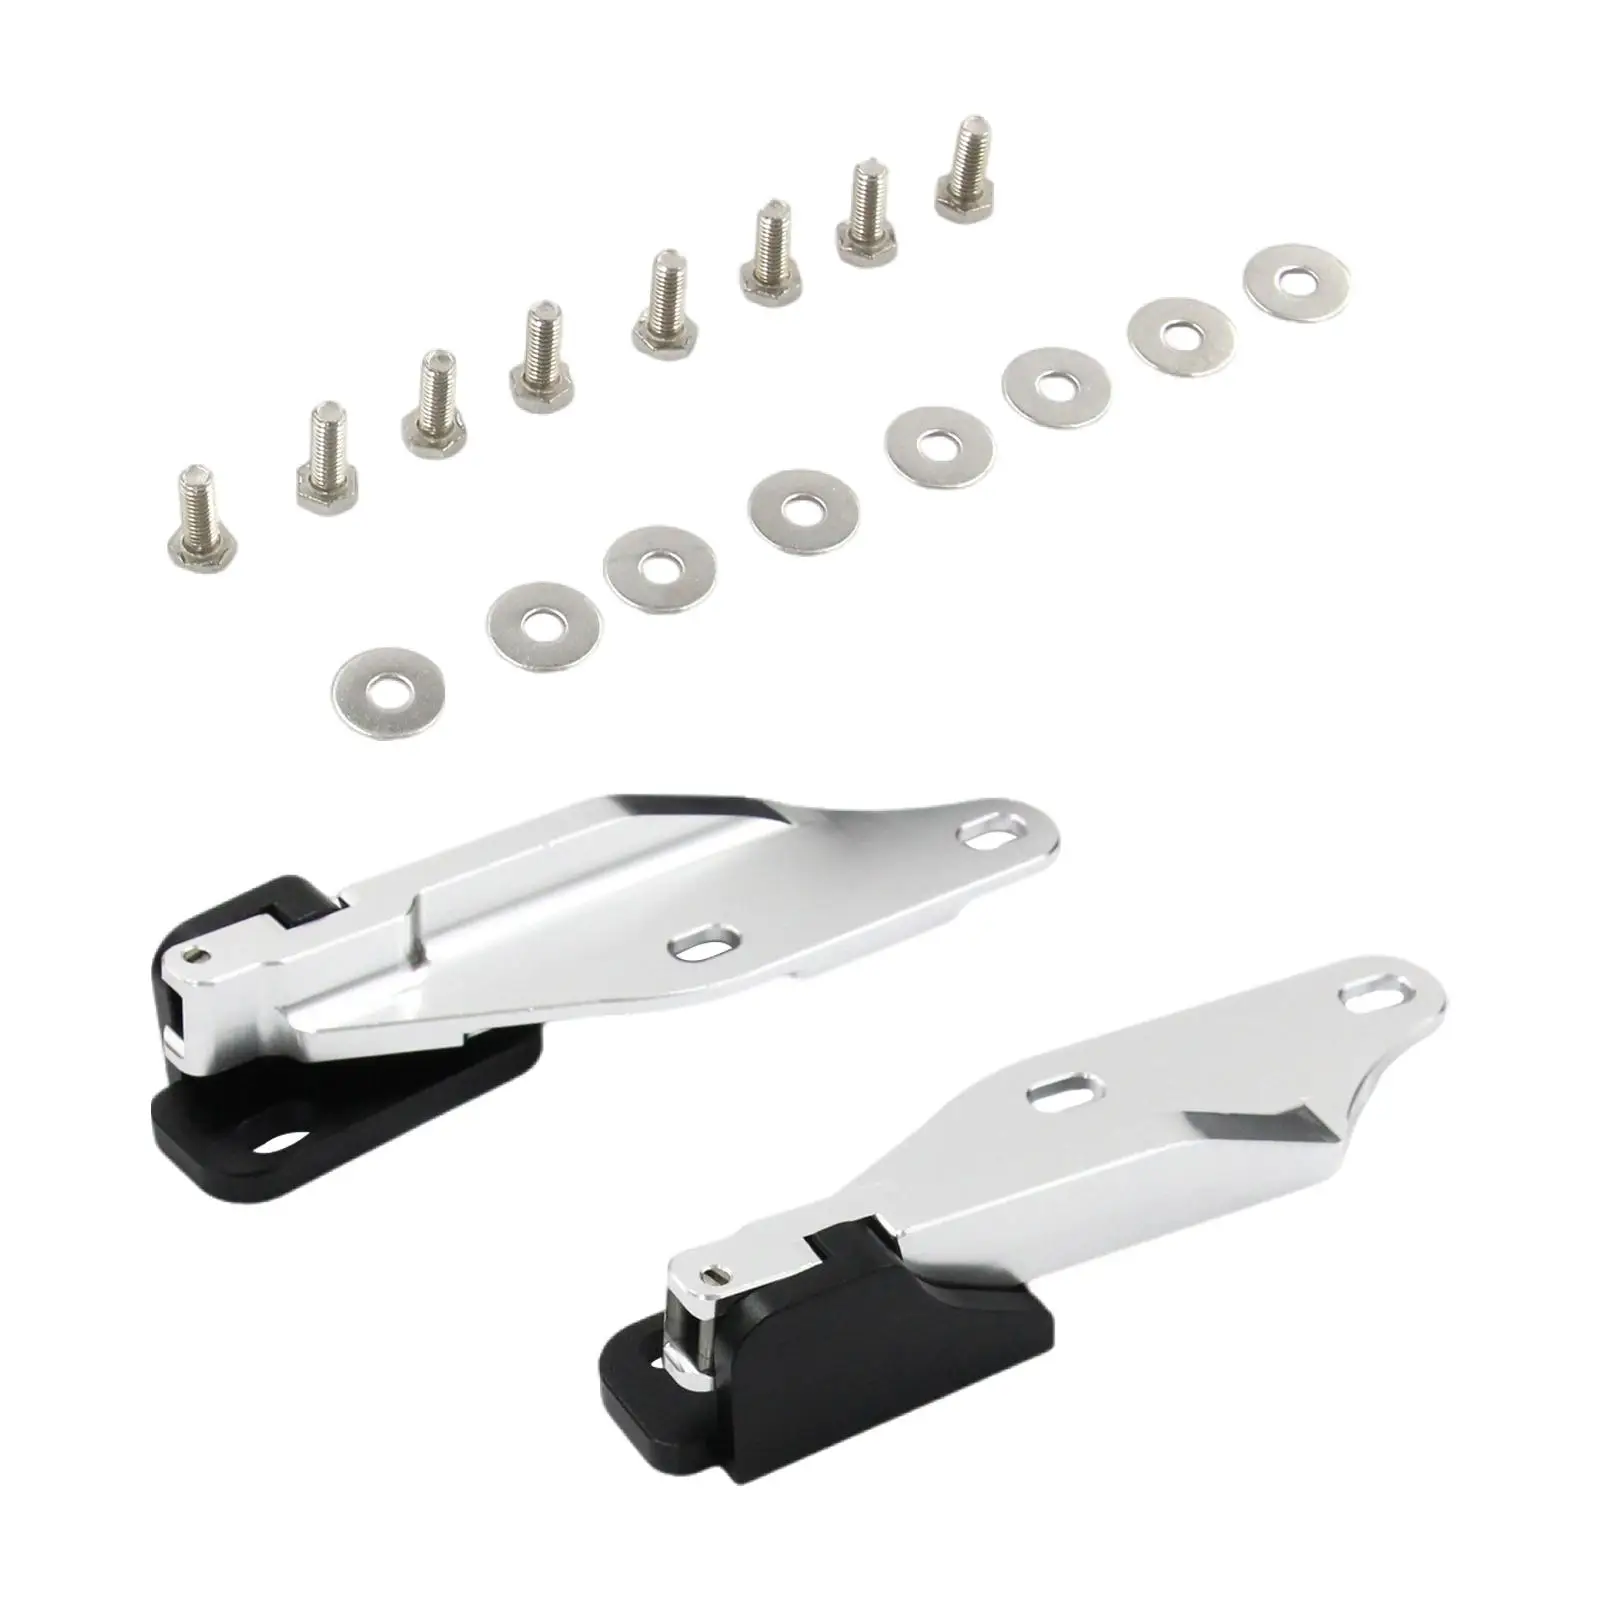 2 Pieces Quick Release Hood Hinge Bonnet Latch High Strength Vehicle Sturdy Accessory for Honda CRV RD Civic EK Replaces